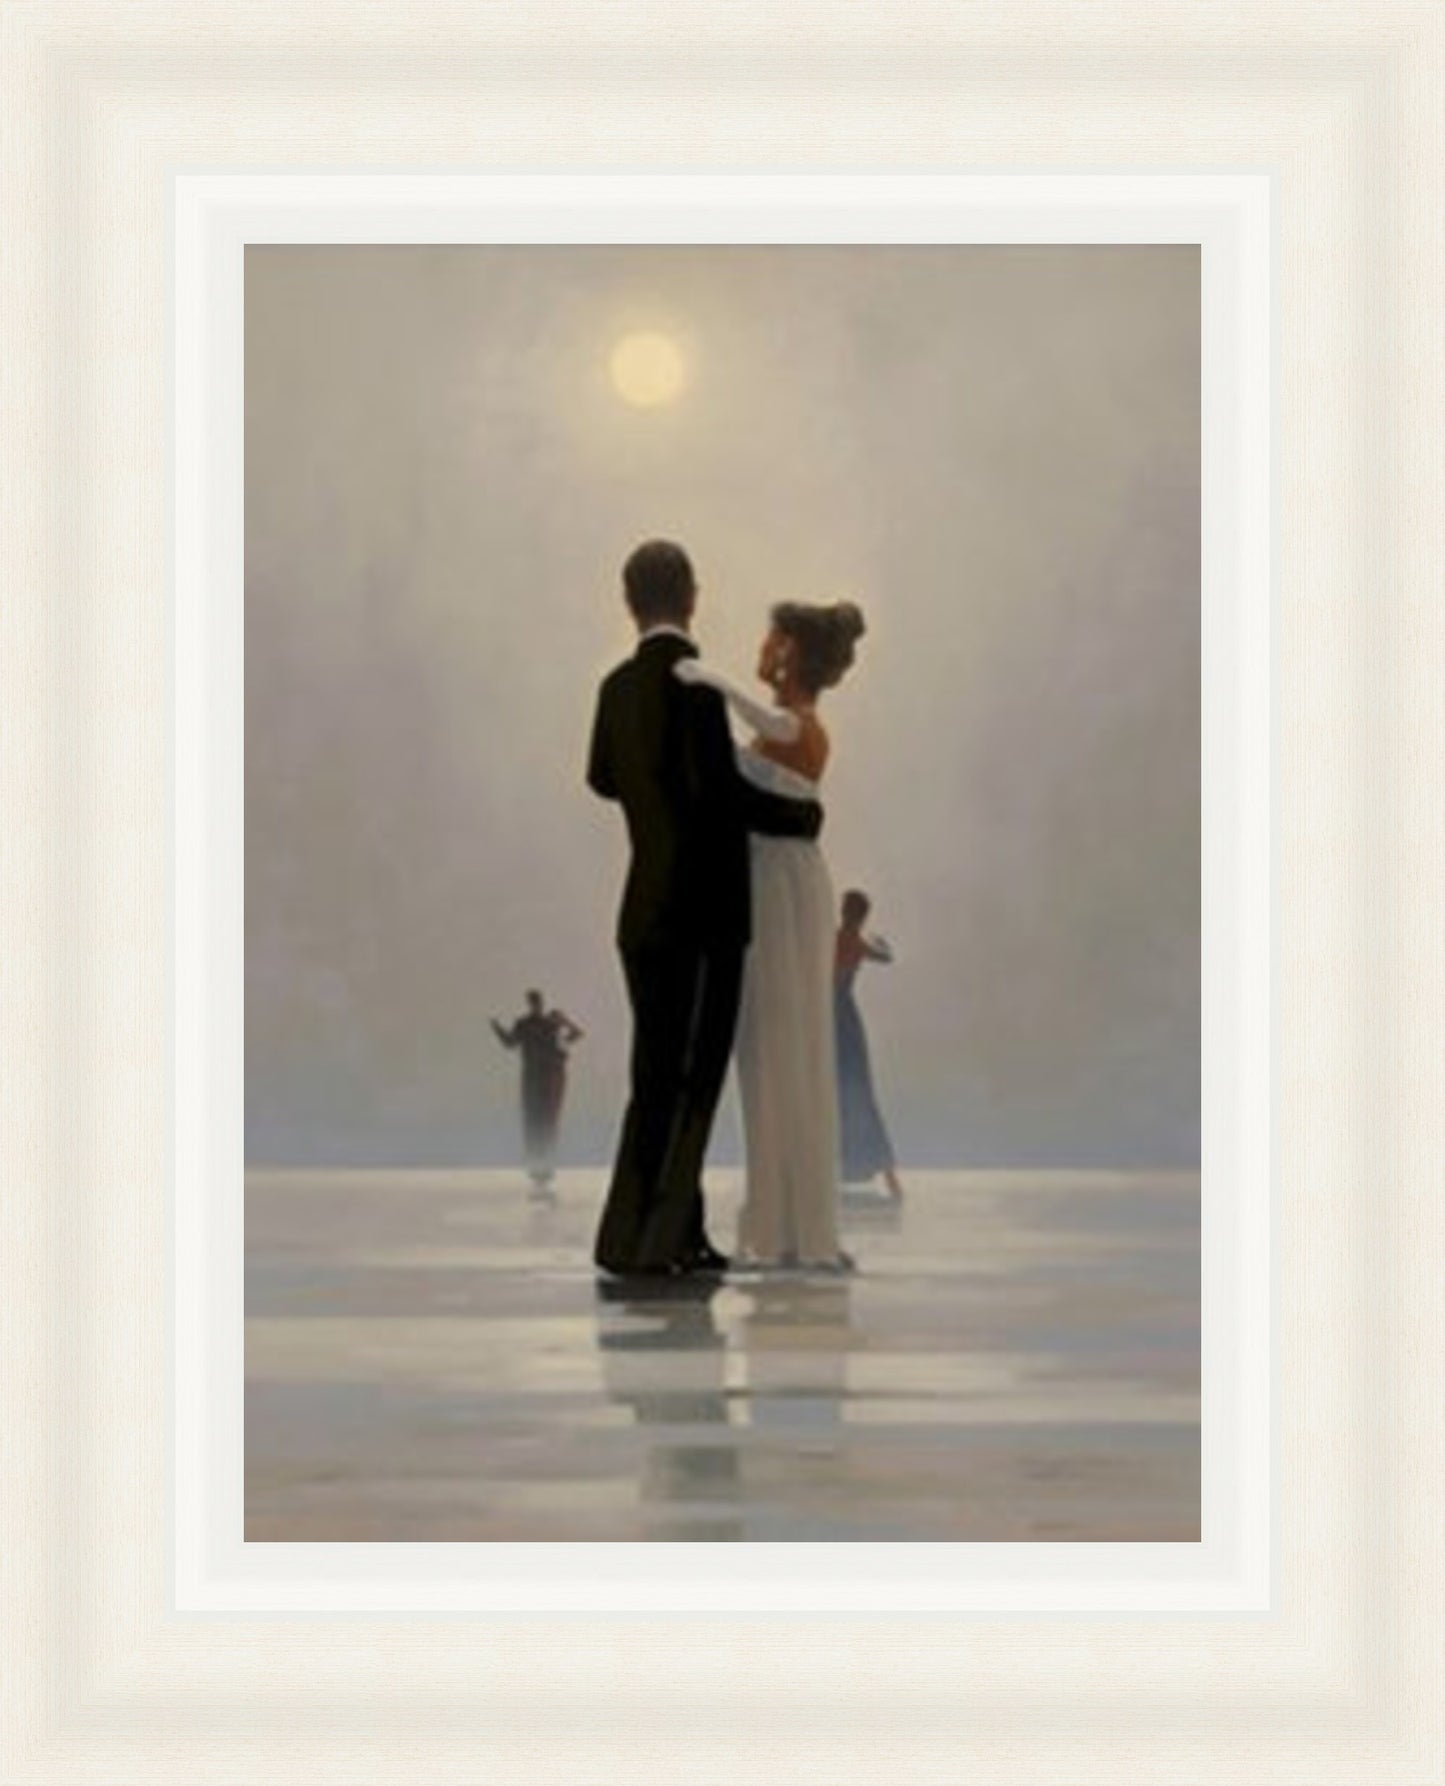 Dance Me to the End of Love by Jack Vettriano